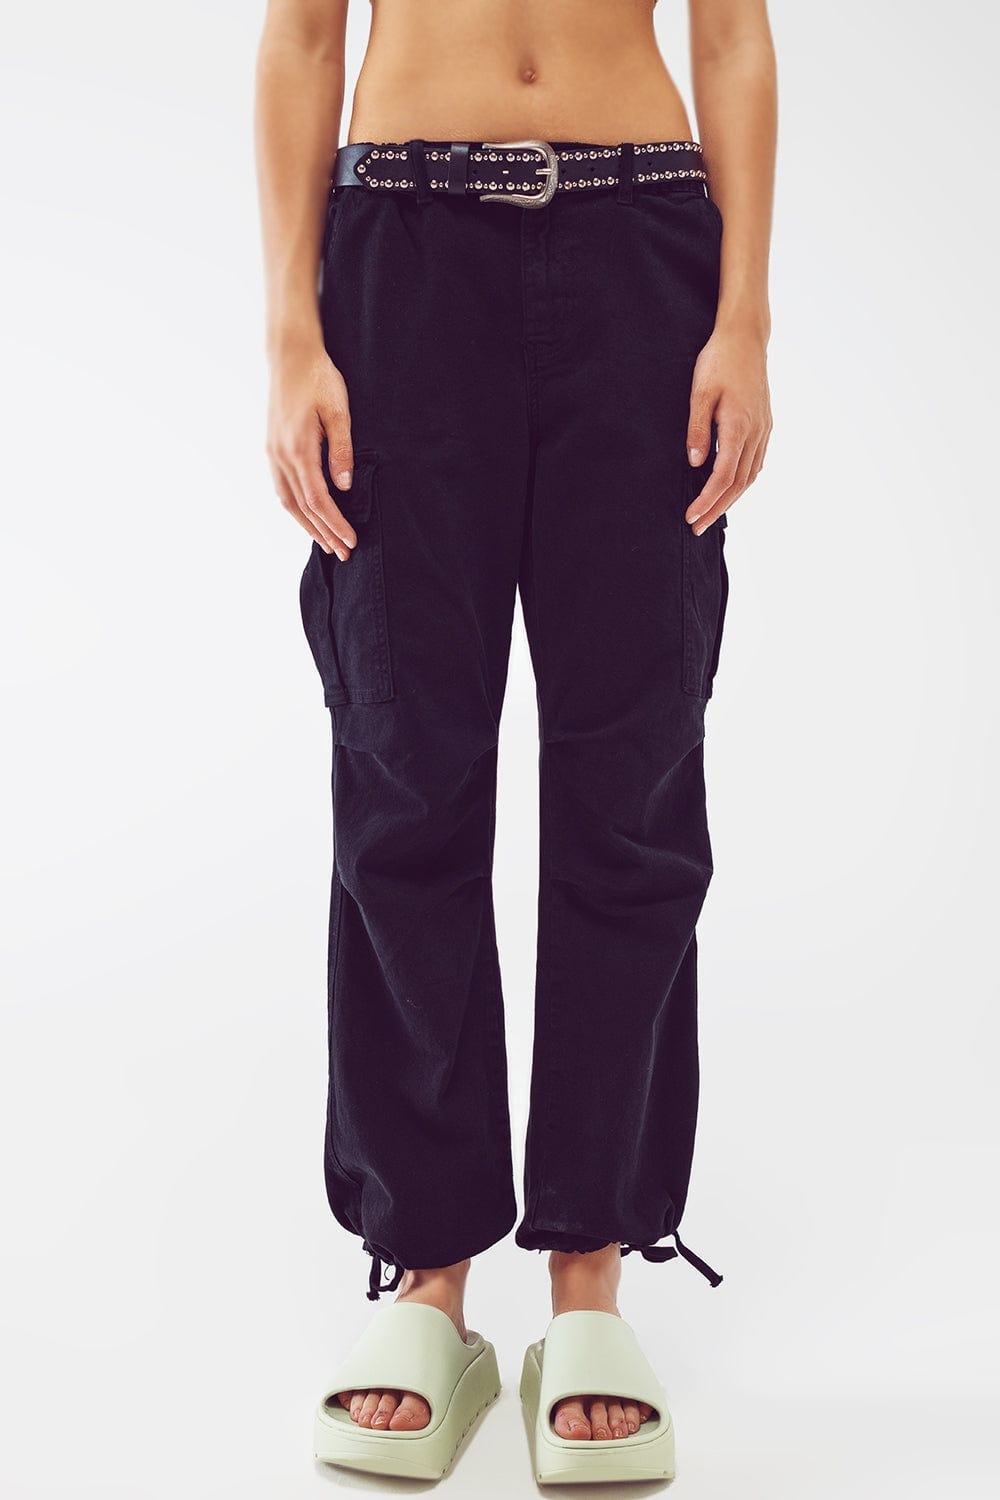 Q2 Women's Pants & Trousers Cargo Pants With Tassel Ends In Black